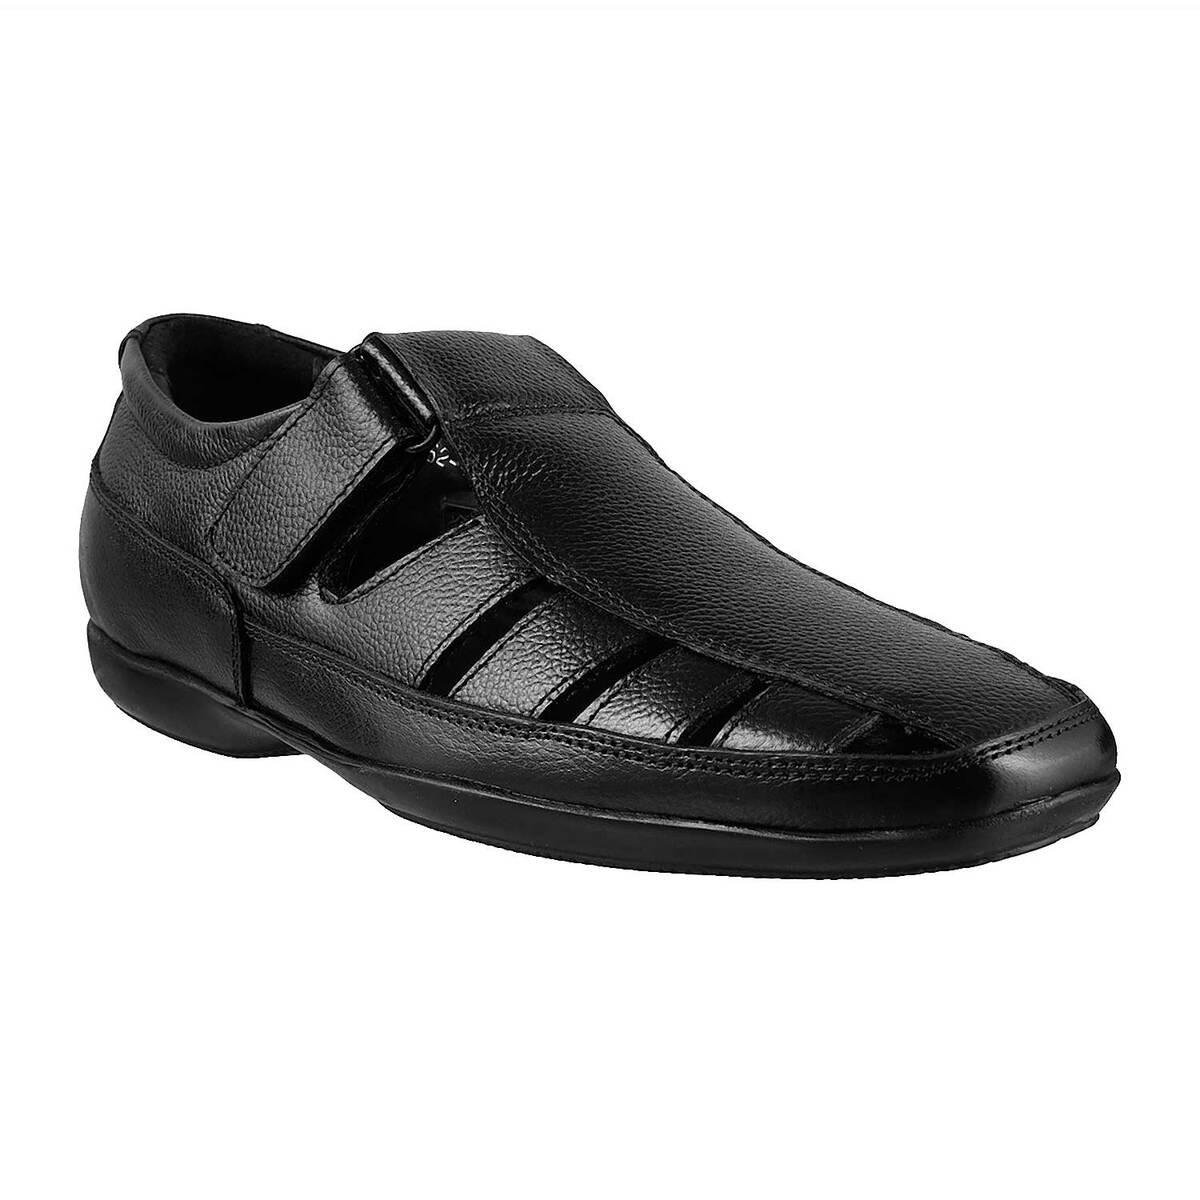 Ethnic Footwear For Mens  Leather school shoes, Mens shoes online, Formal  shoes for men